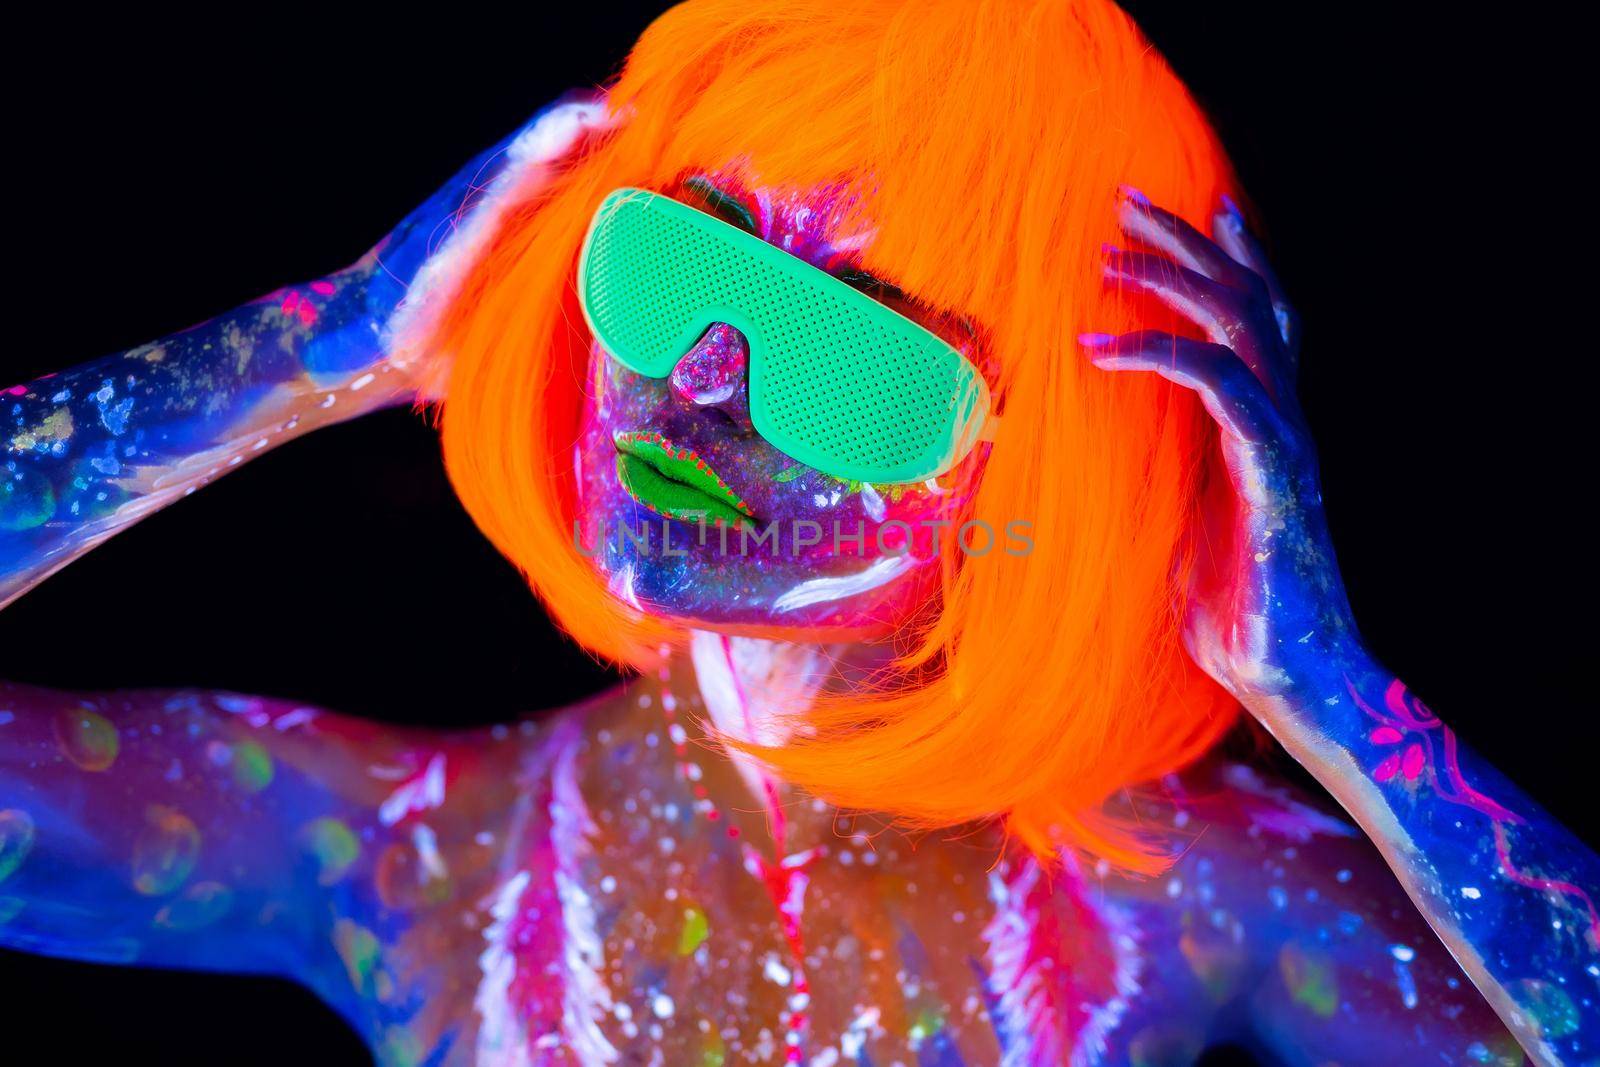 Disco dancer in neon light. Fashion model woman in neon light, portrait of beautiful model girl with fluorescent make-up, Body Art design in UV, painted face, colorful make up, over black background. by StudioPeace